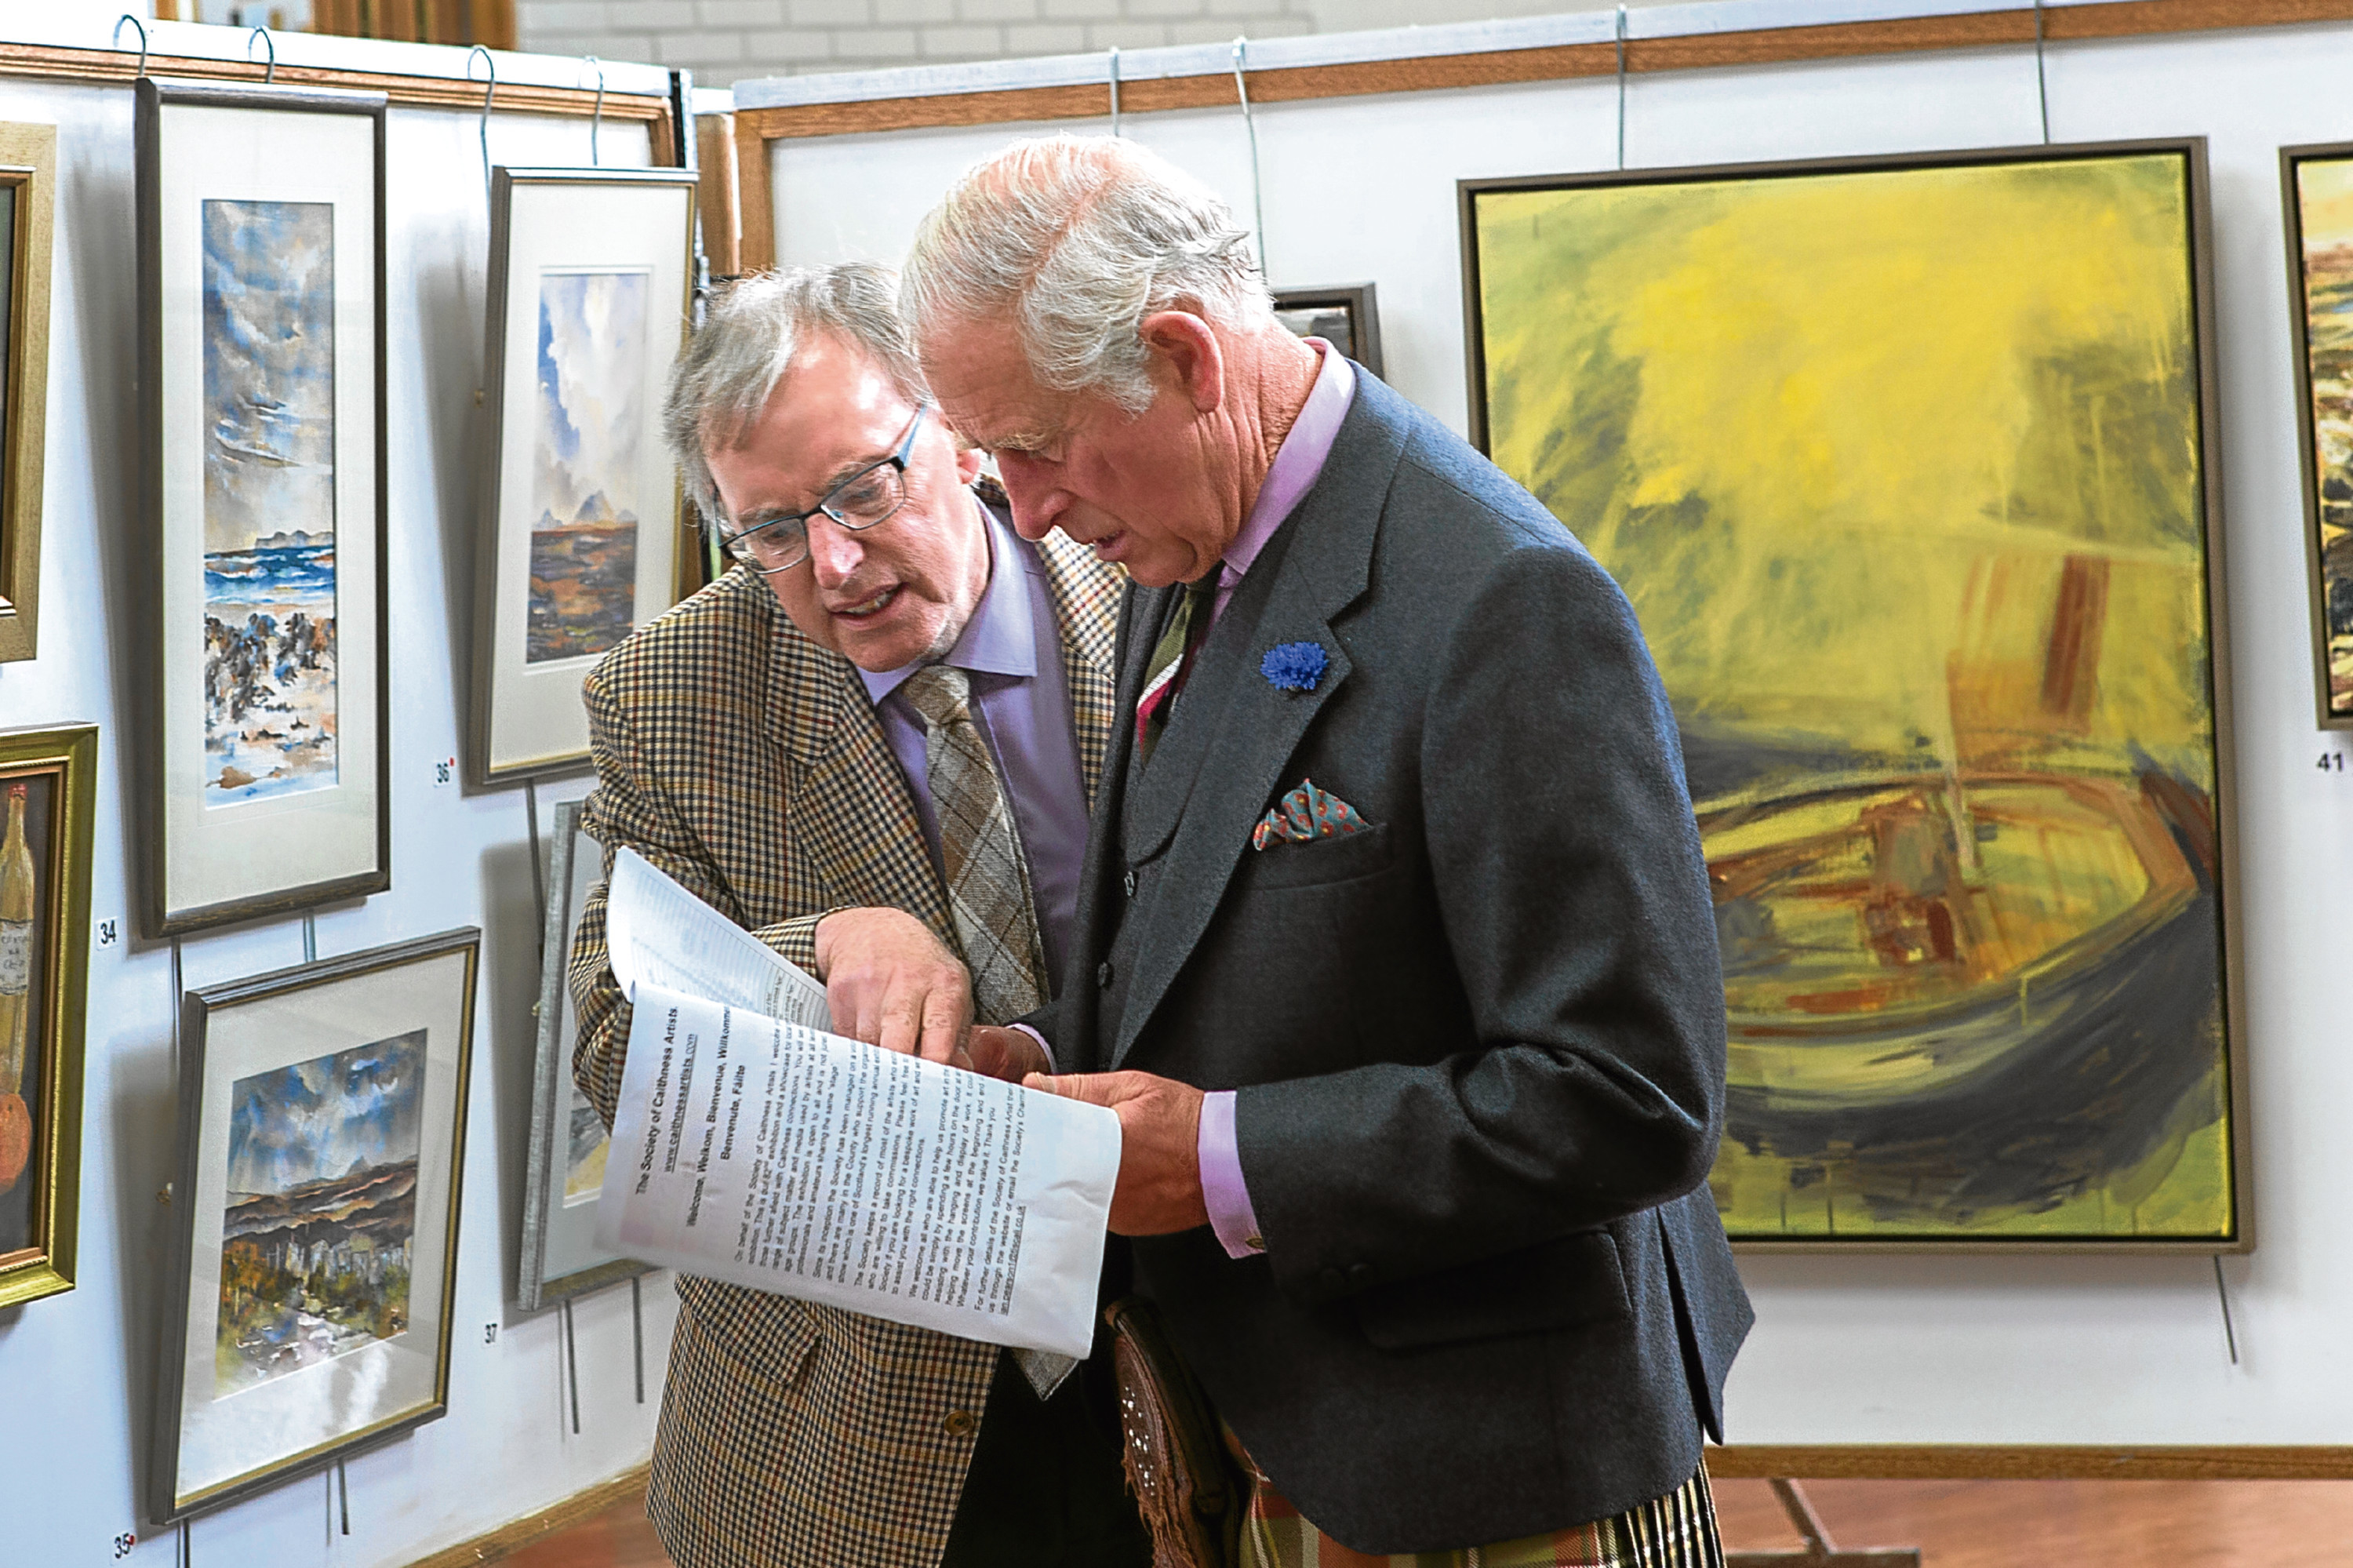 Prince Charles at the Thurso art exhibition, with Ian Pearson chairman of the Society of Caithness Artists (Robert MacDonald/Northern Studios)